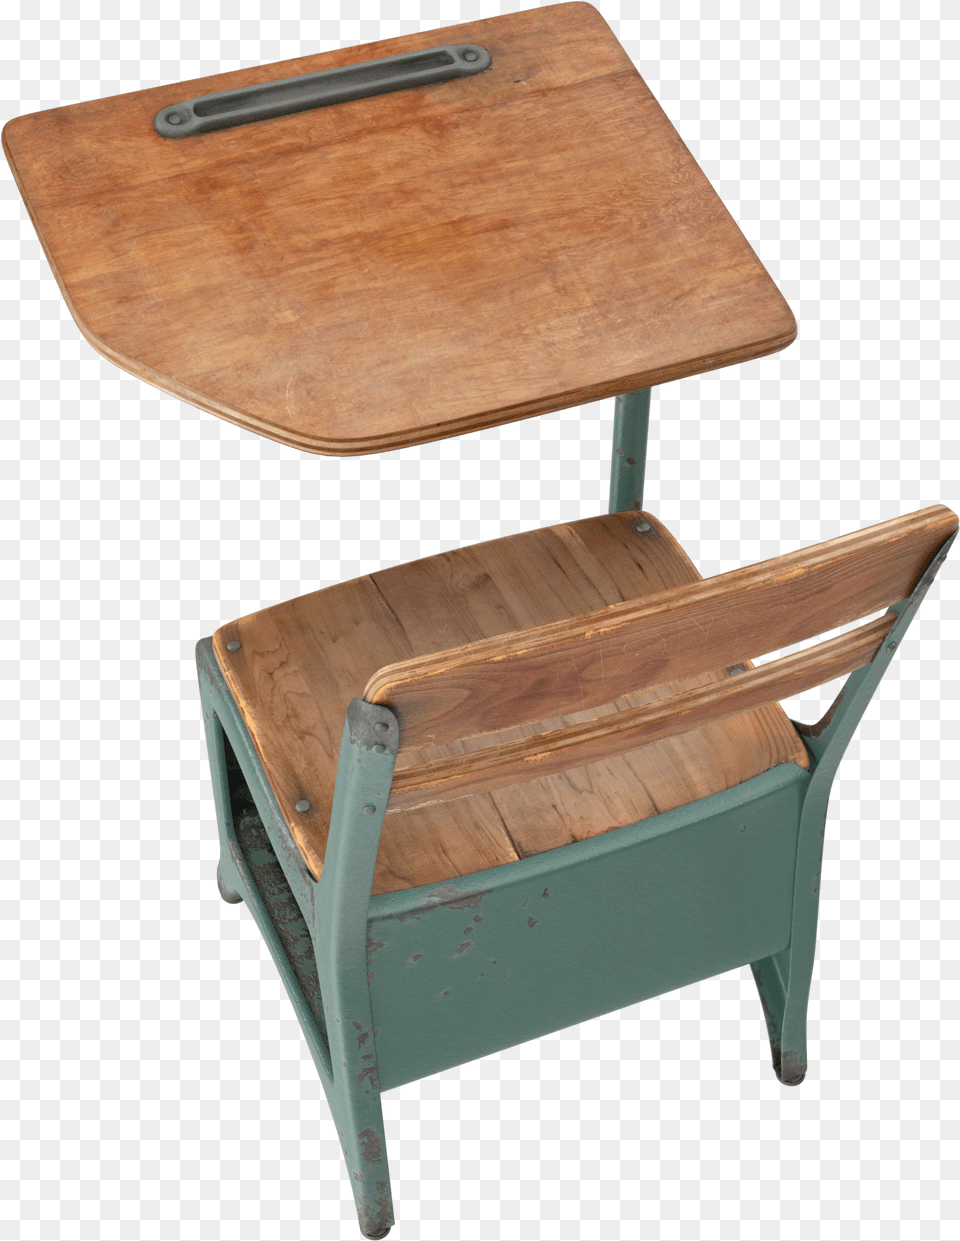 Antique School Desk Outdoor Furniture, Plywood, Wood, Chair, Table Png Image